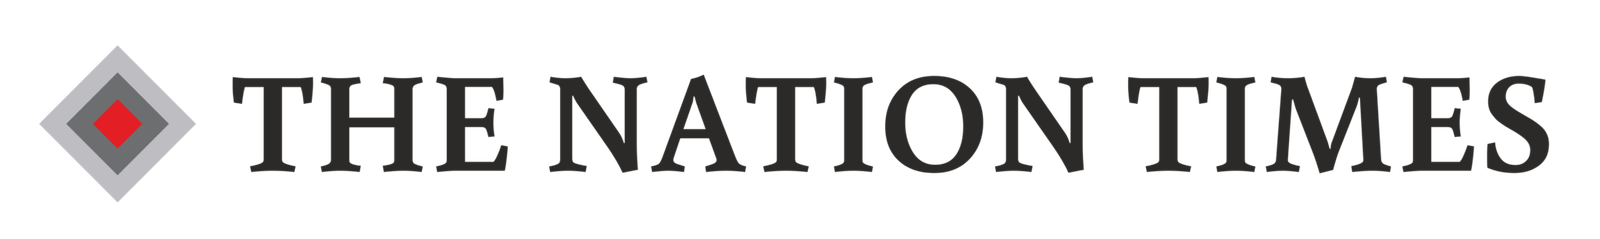 the-nation-times-logo